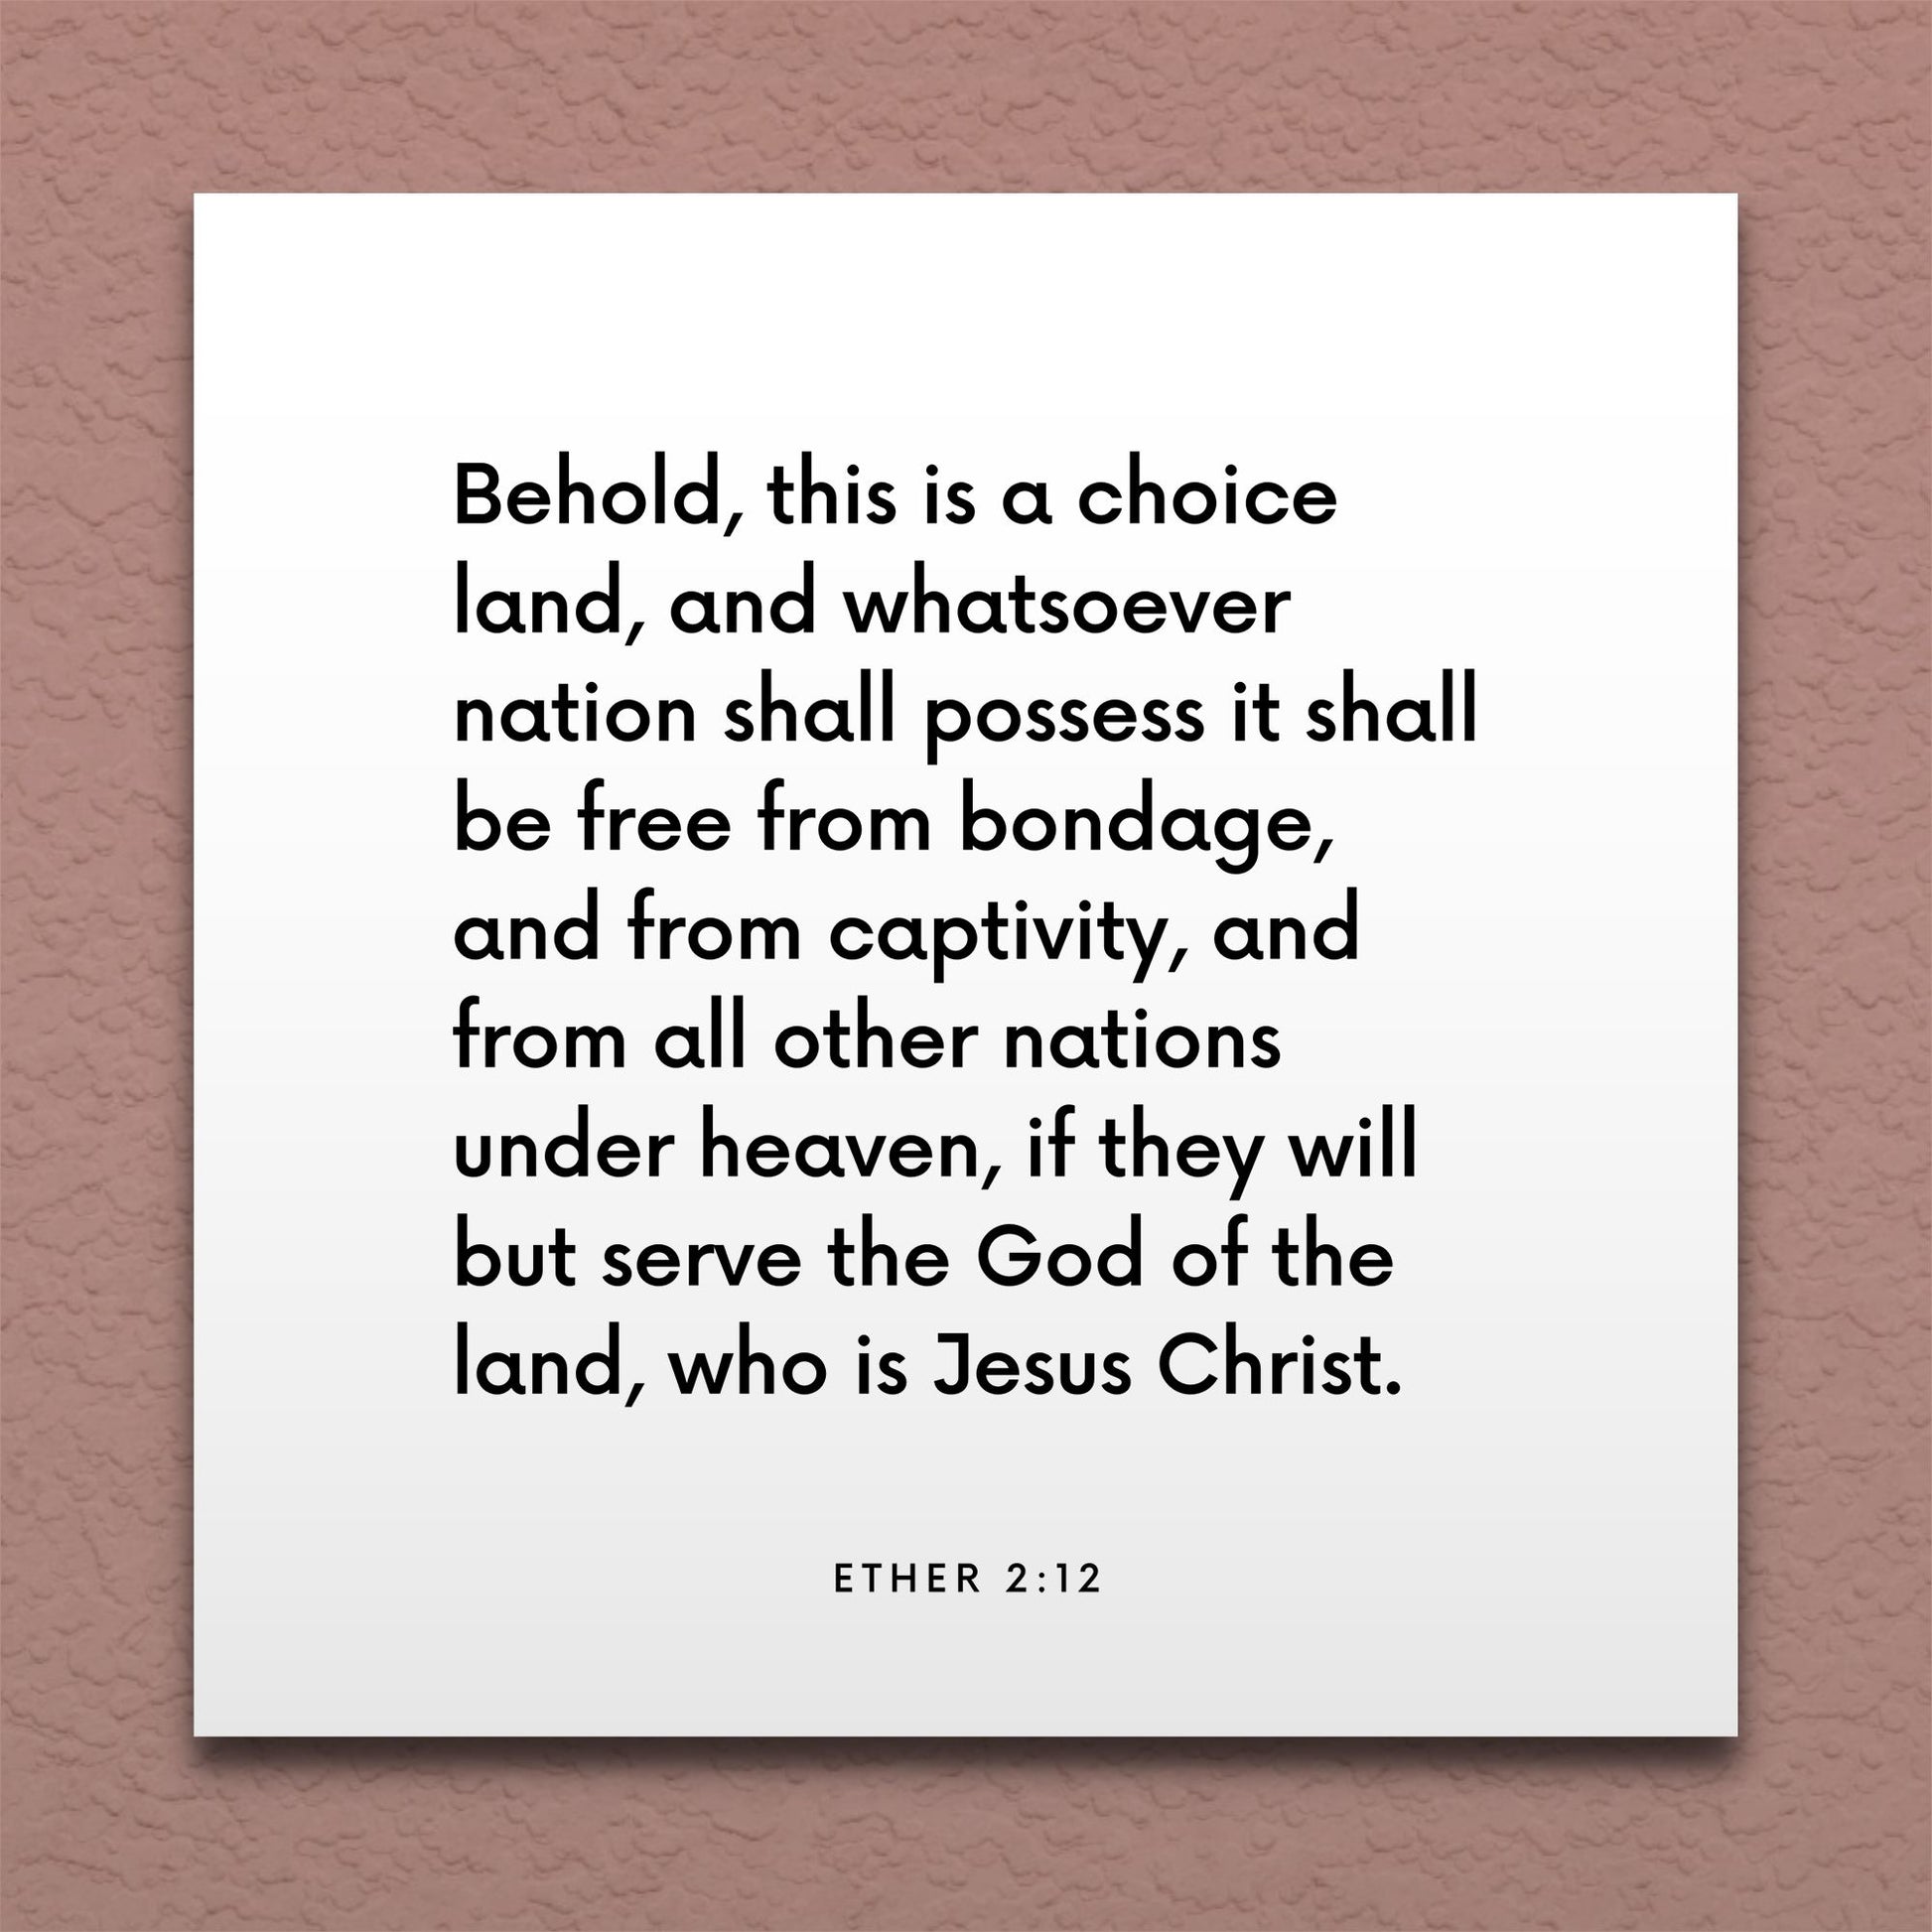 Wall-mounted scripture tile for Ether 2:12 - "This is a choice land"